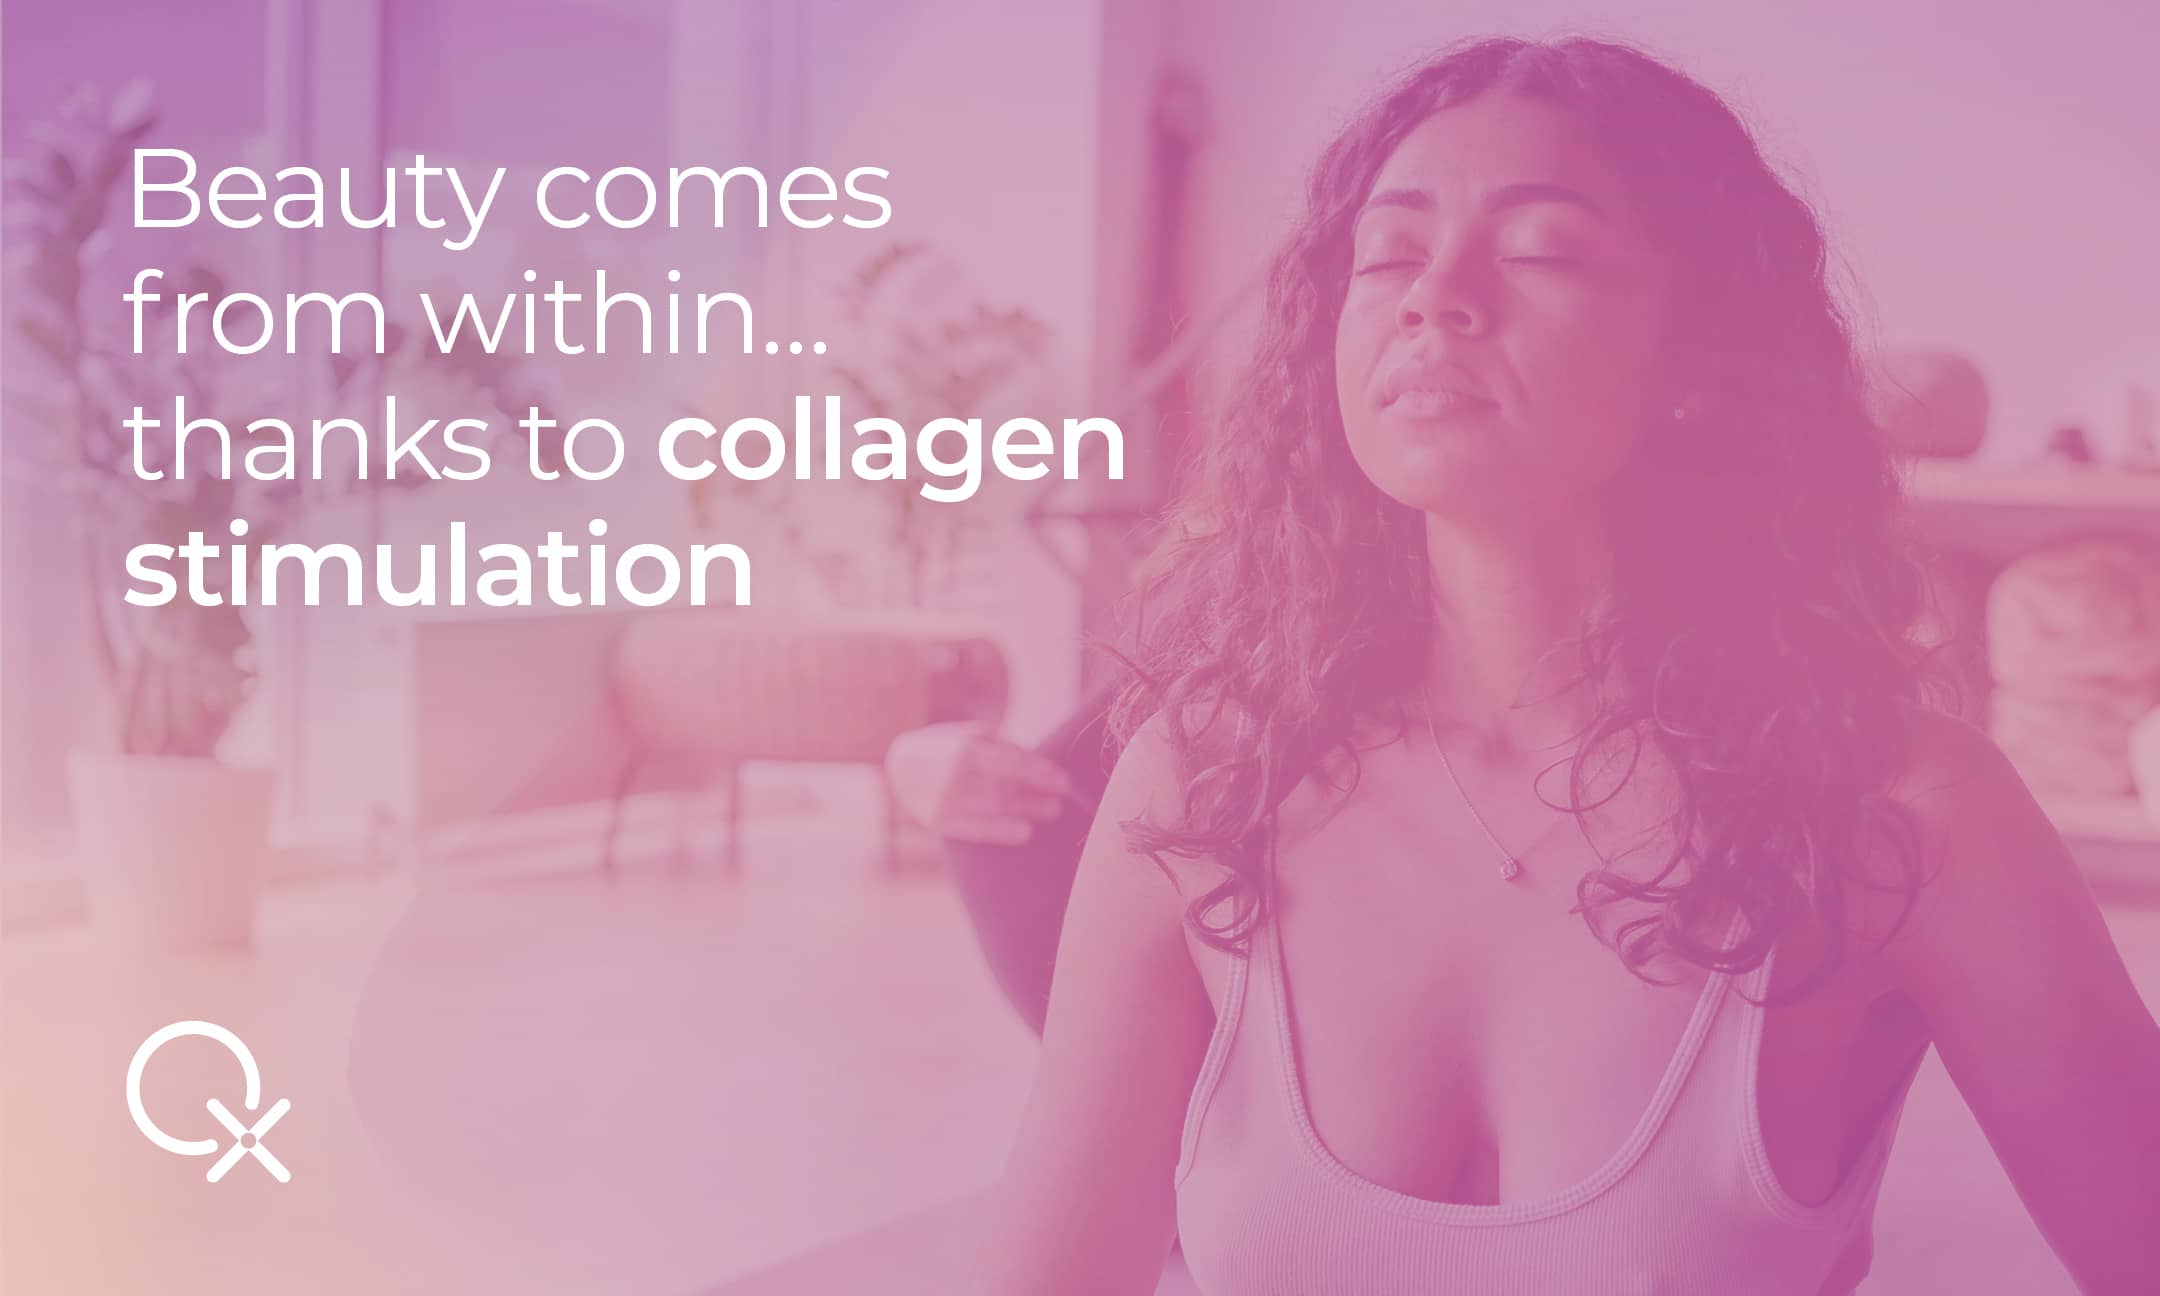 Understanding the true role of collagen stimulation is crucial to making informed choices about products and treatments